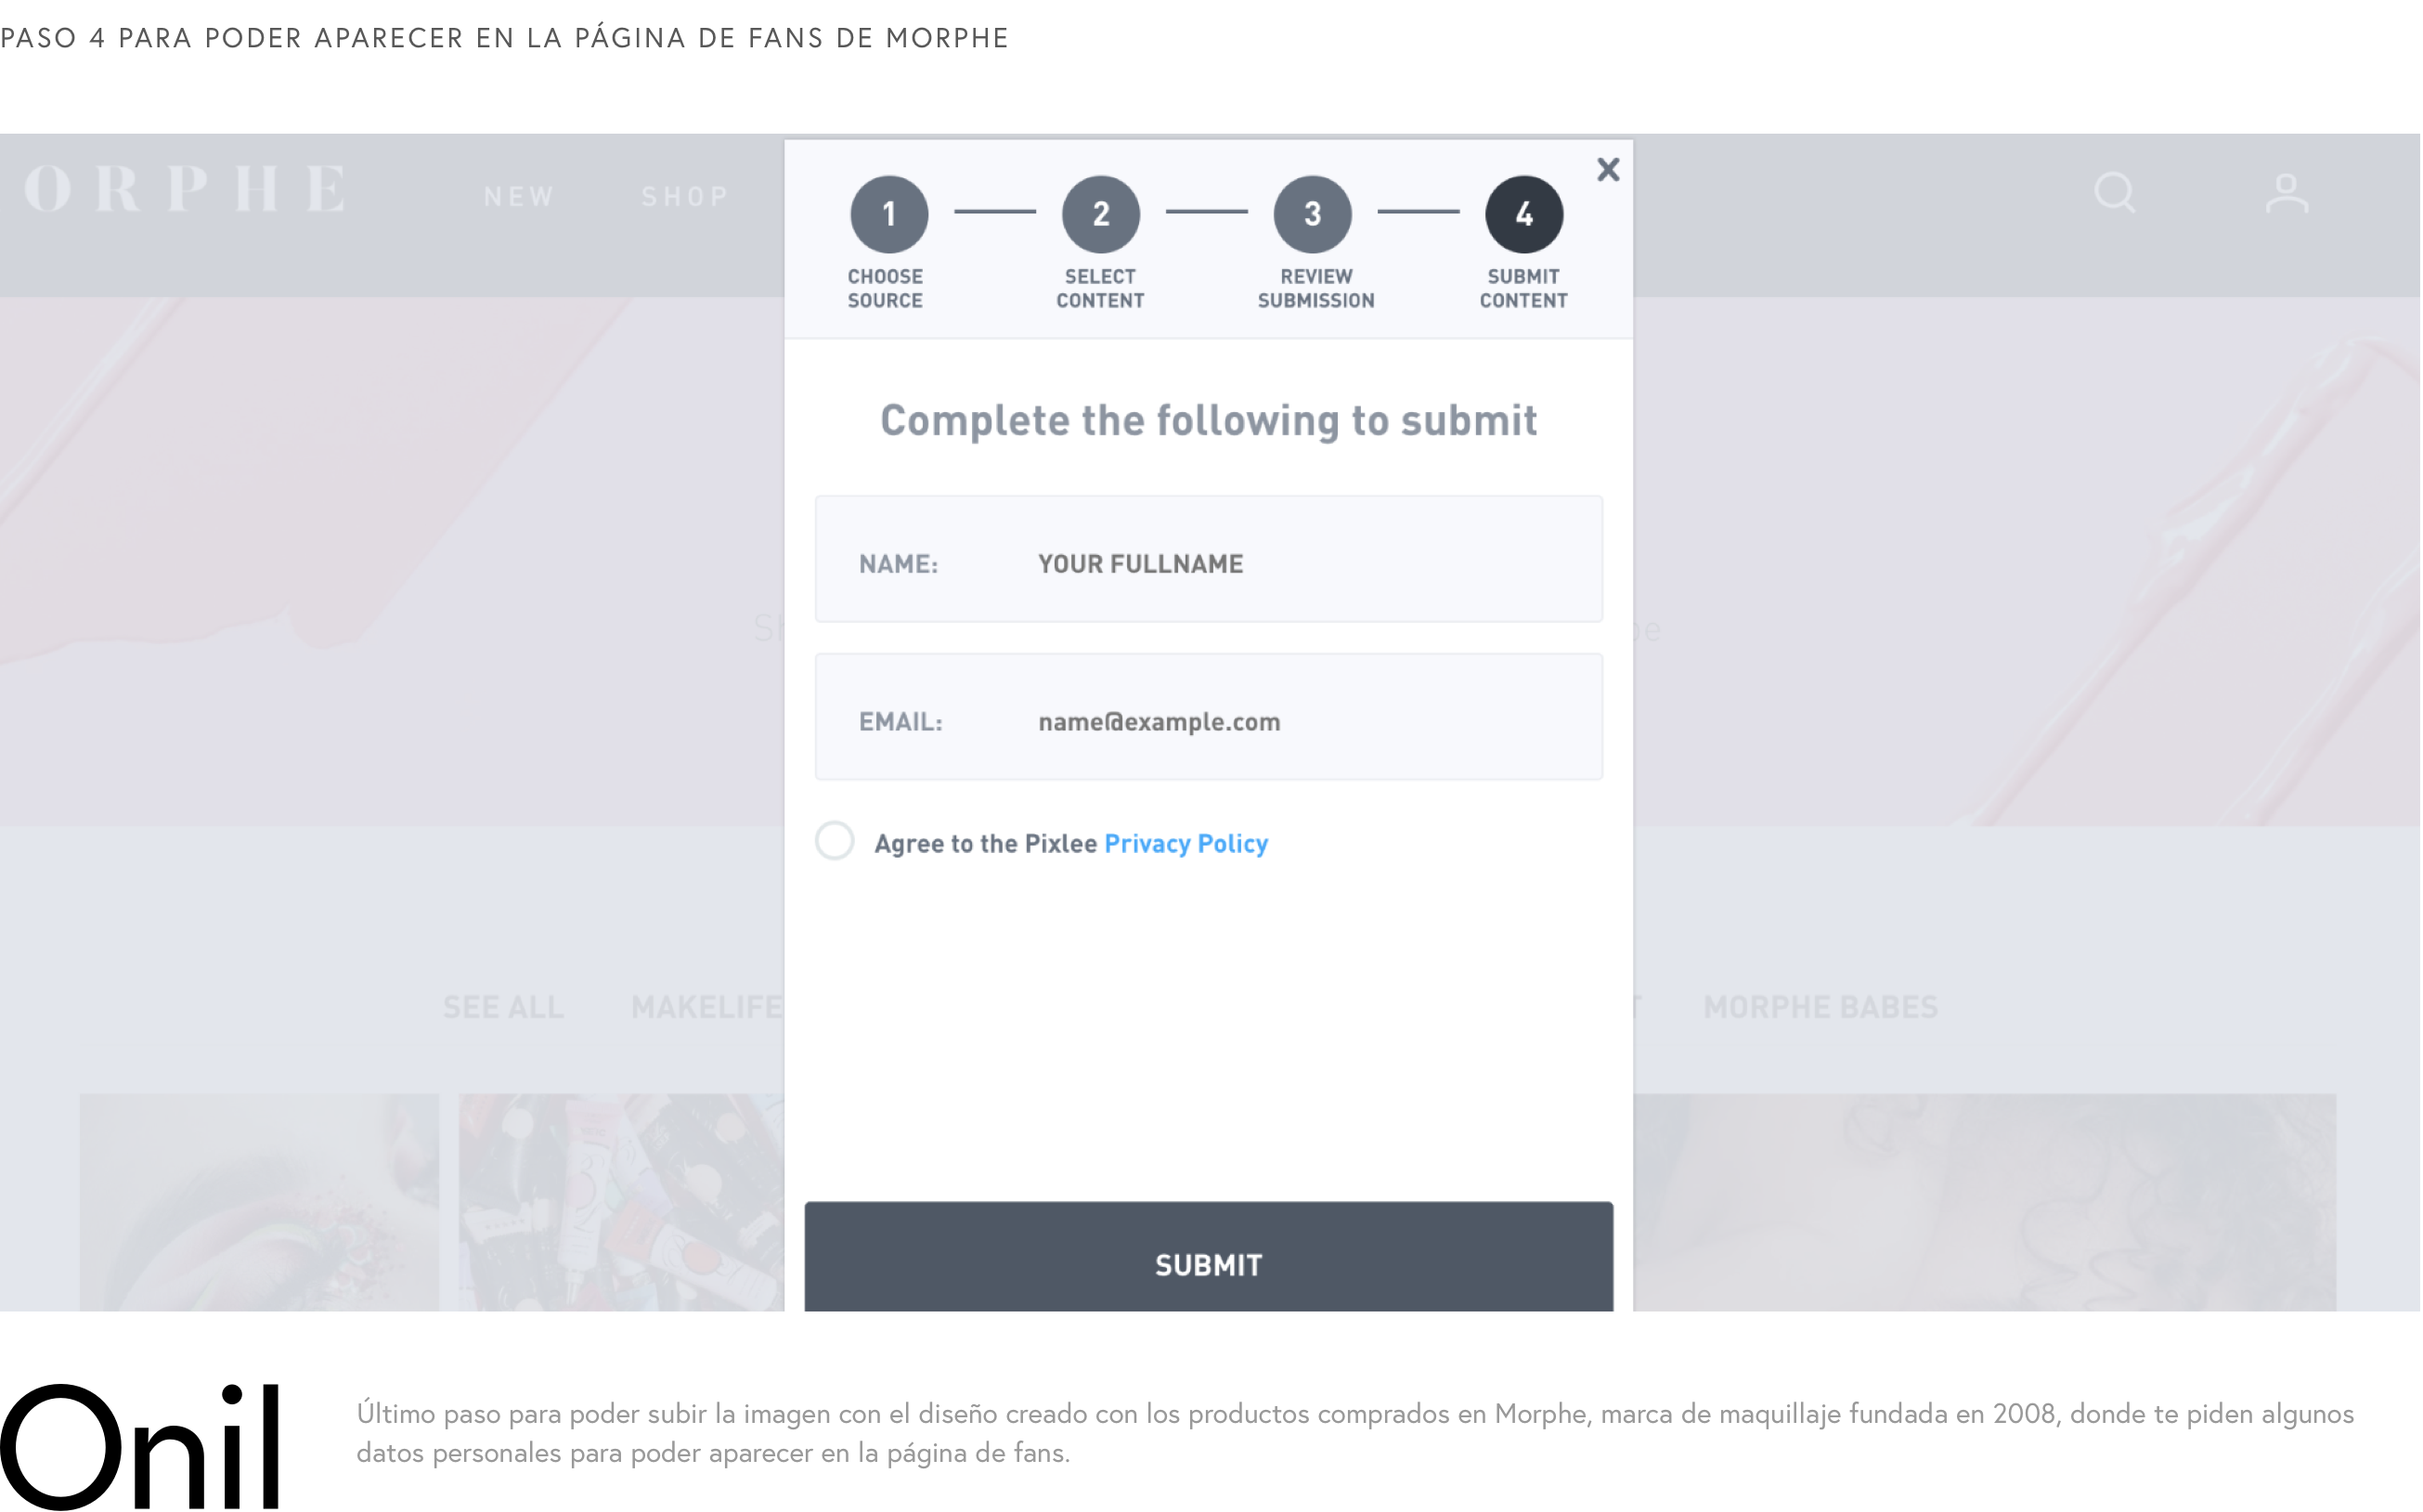 Step 4 to be able to appear on the Morphe fan page - Last step to be able to upload the image with the design created with the products purchased in Morphe, where they ask you for some personal information to be able to appear on the fan page.